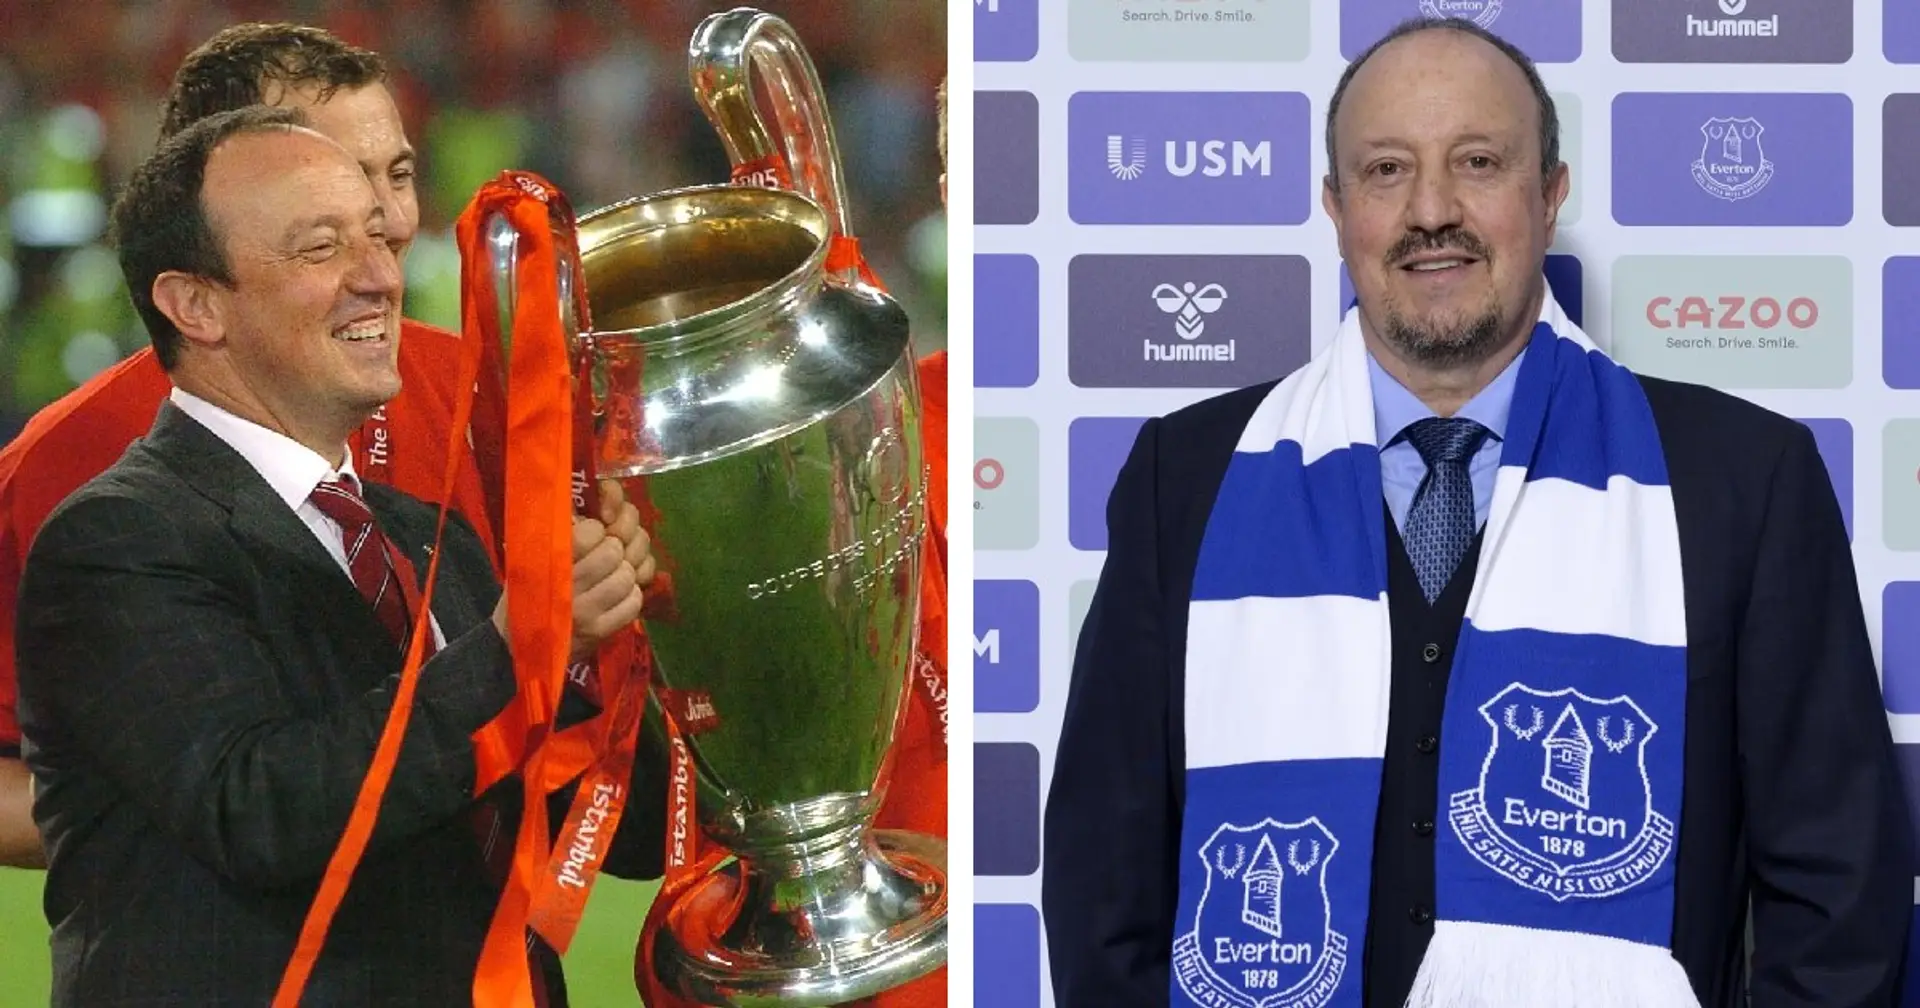 Benitez: 'I can’t say I’m more Liverpool or Everton today, I still have good friends amongst the Everton fans'